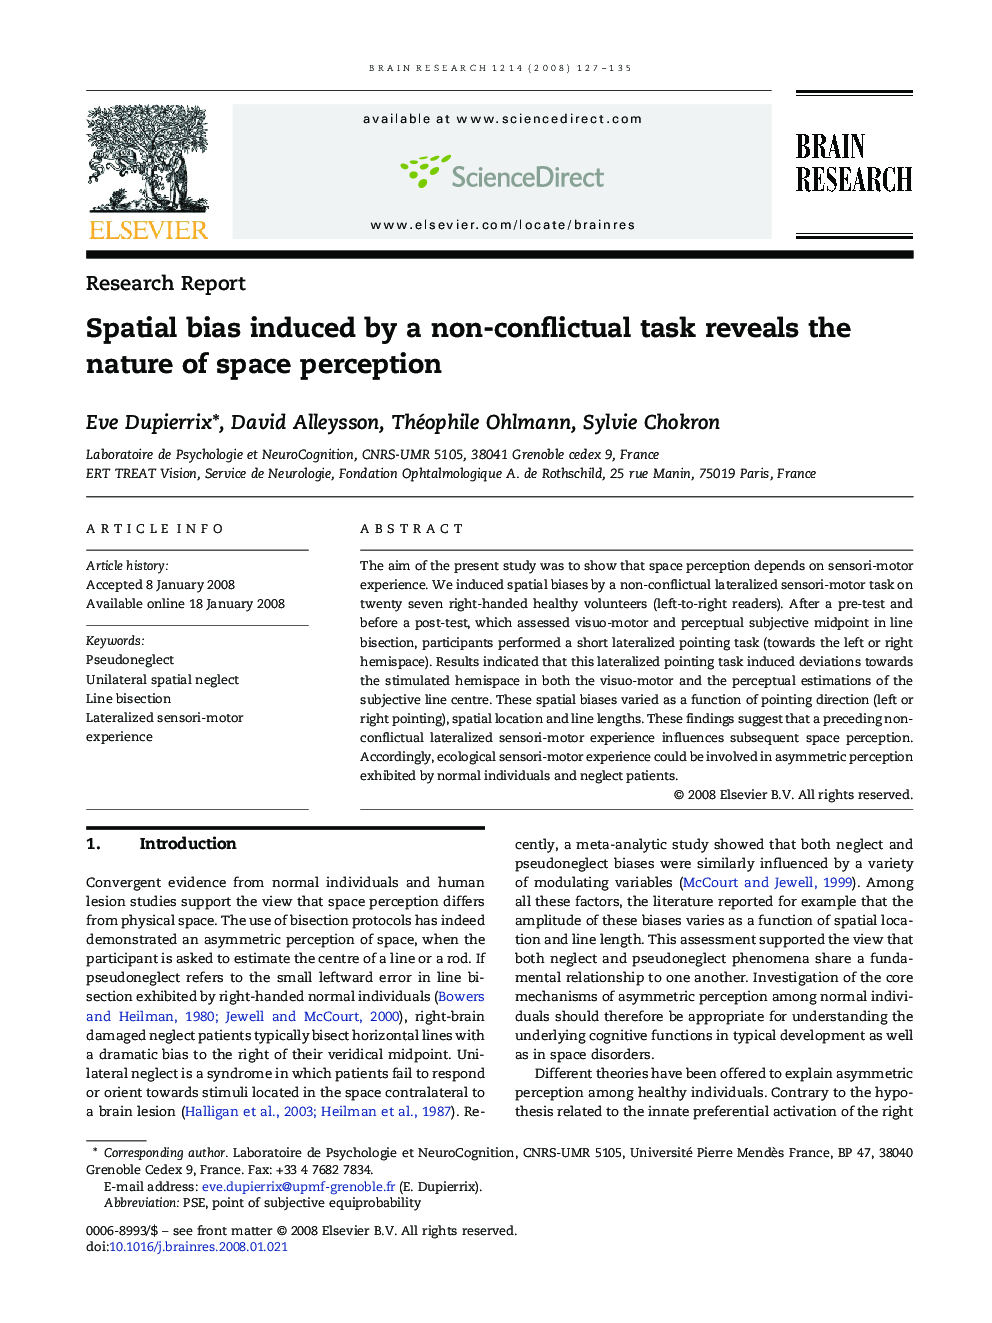 Spatial bias induced by a non-conflictual task reveals the nature of space perception